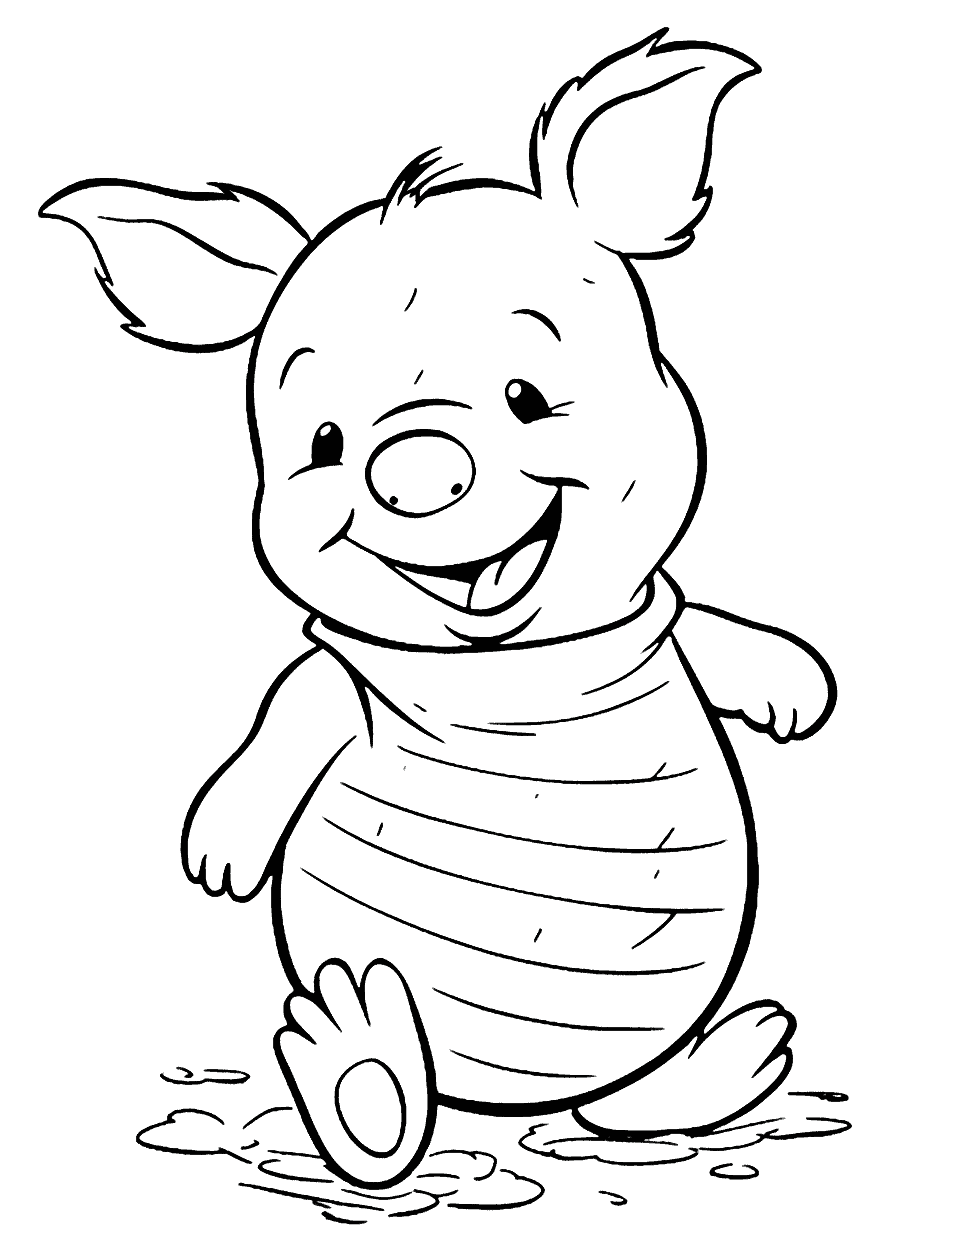 Adorable Piglet Animal Coloring Page - A cute and chubby piglet happily rolling in the mud.